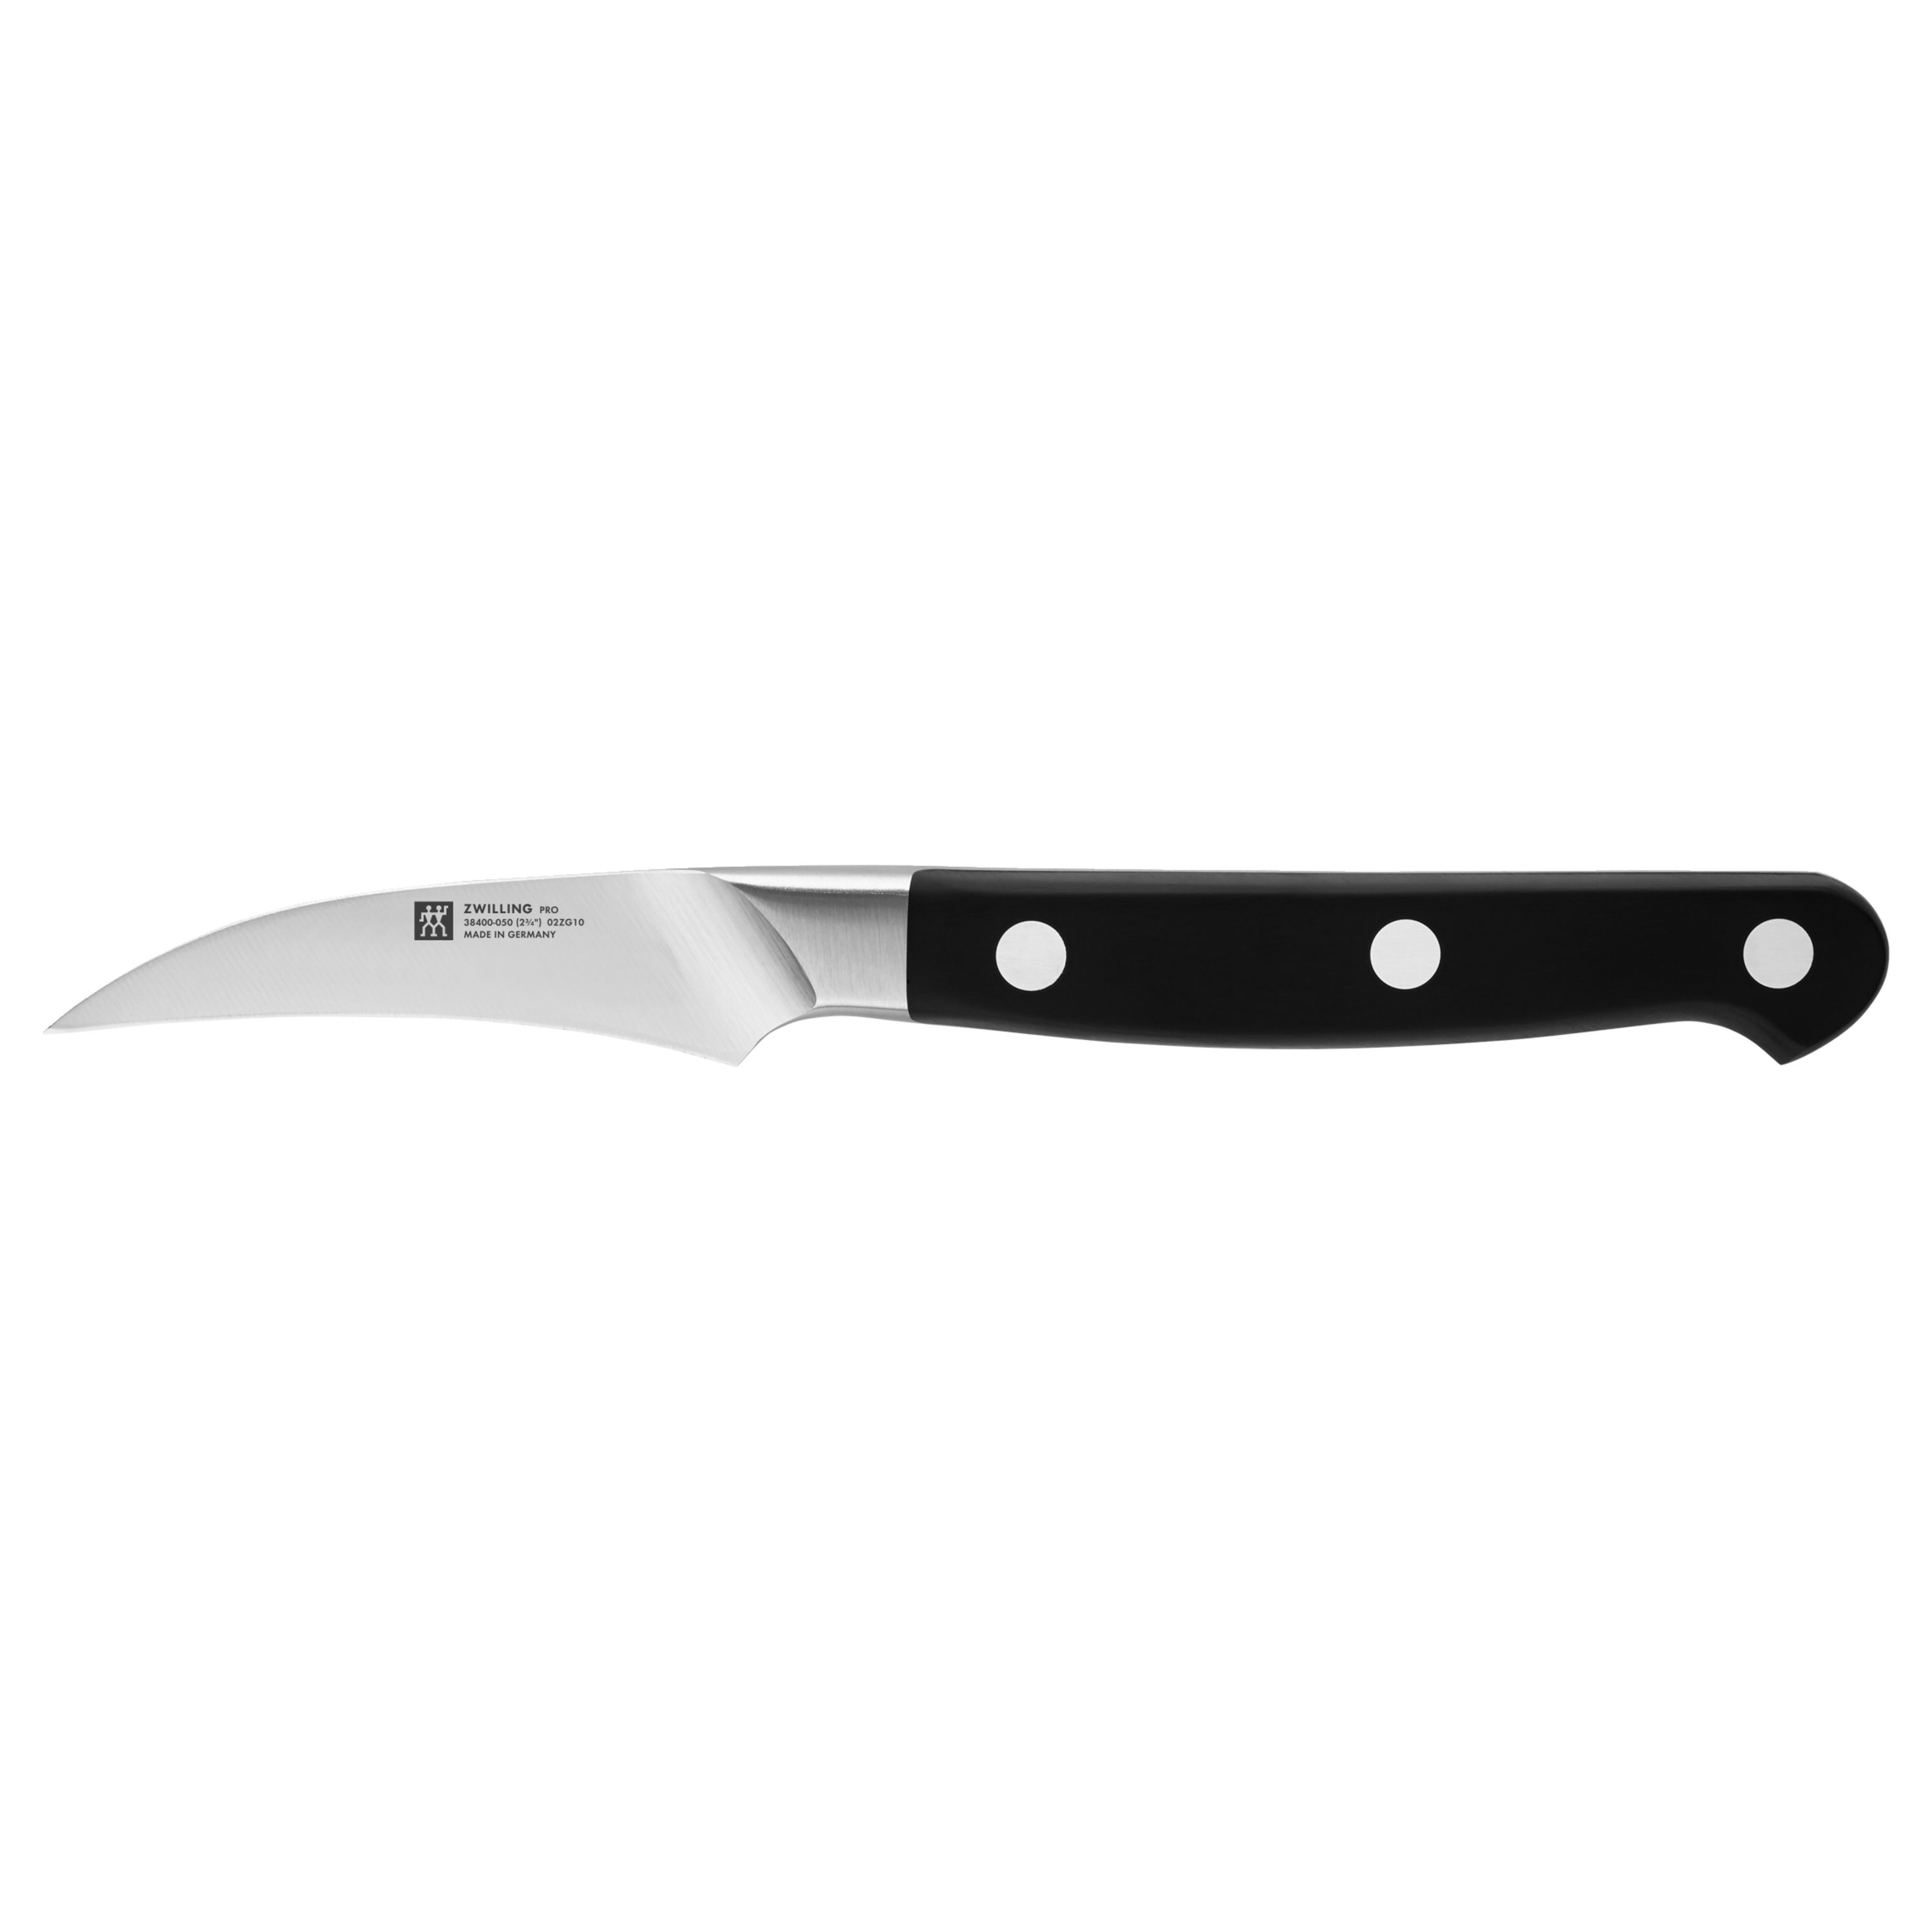 Warning - Zwilling Sales Rep Said The Product Will Sharpen Ceramic Knives :  r/Costco